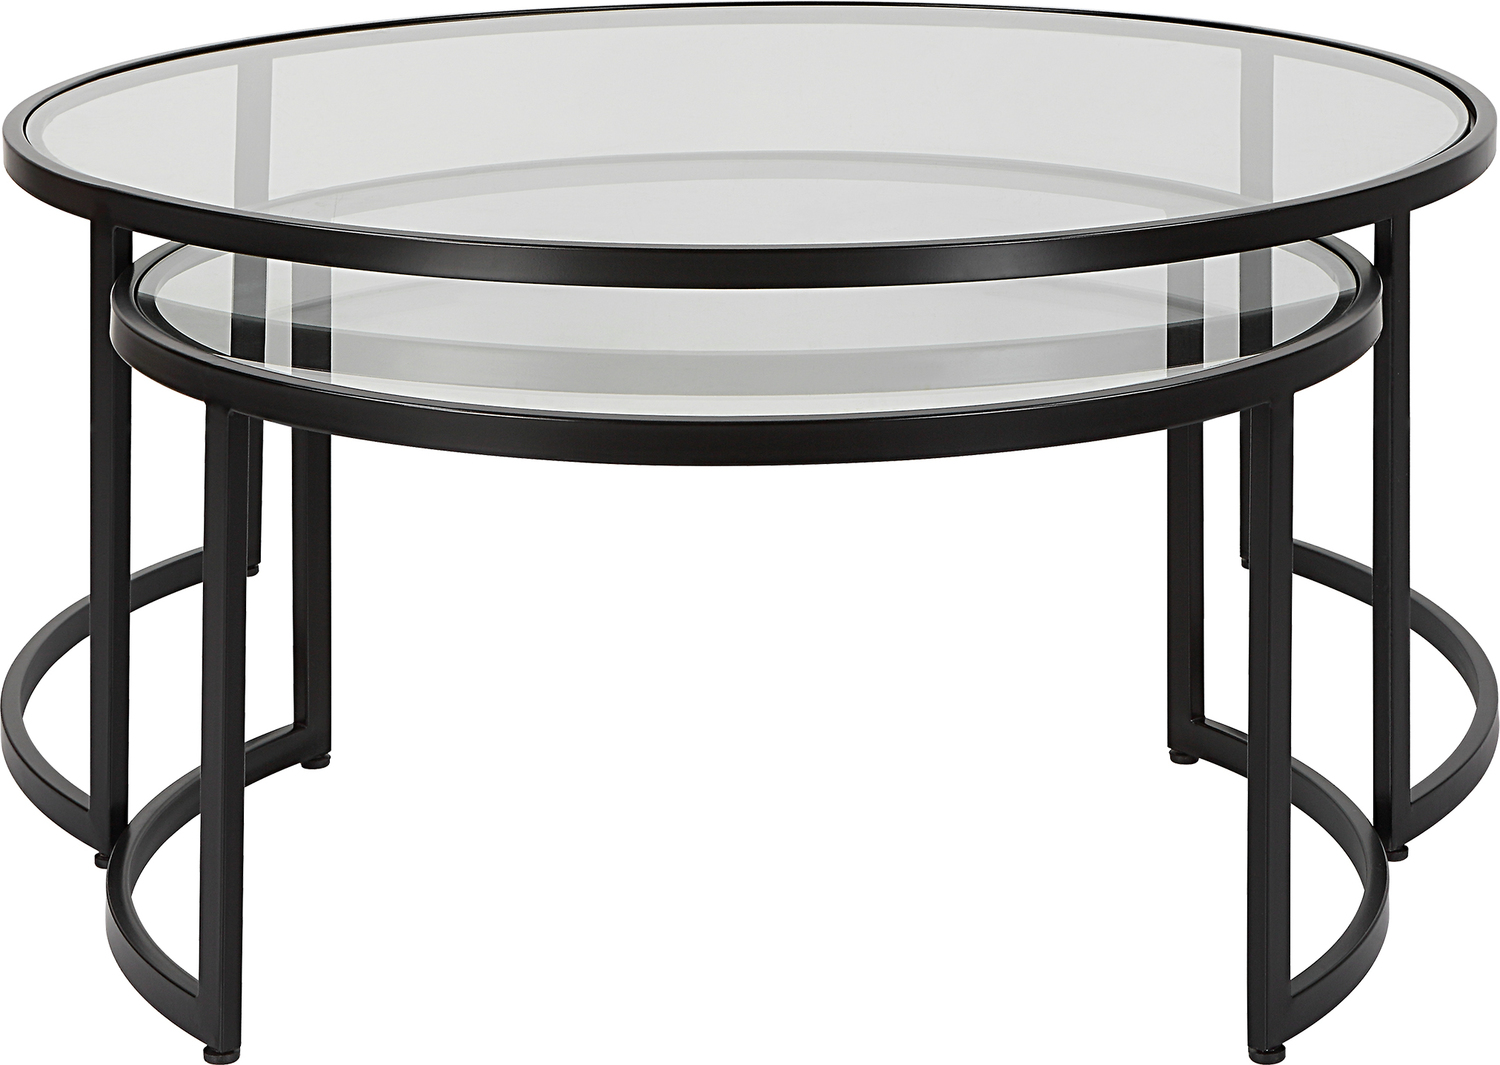 glass top patio coffee table Uttermost Coffee Table Designed To Nest As An Oversized Coffee Table With The Ability To Completely Separate, Crafted From Hand Forged Iron And Finished In A Contemporary Satin Black. Sizes: Sm-31x16, Lg-42x18